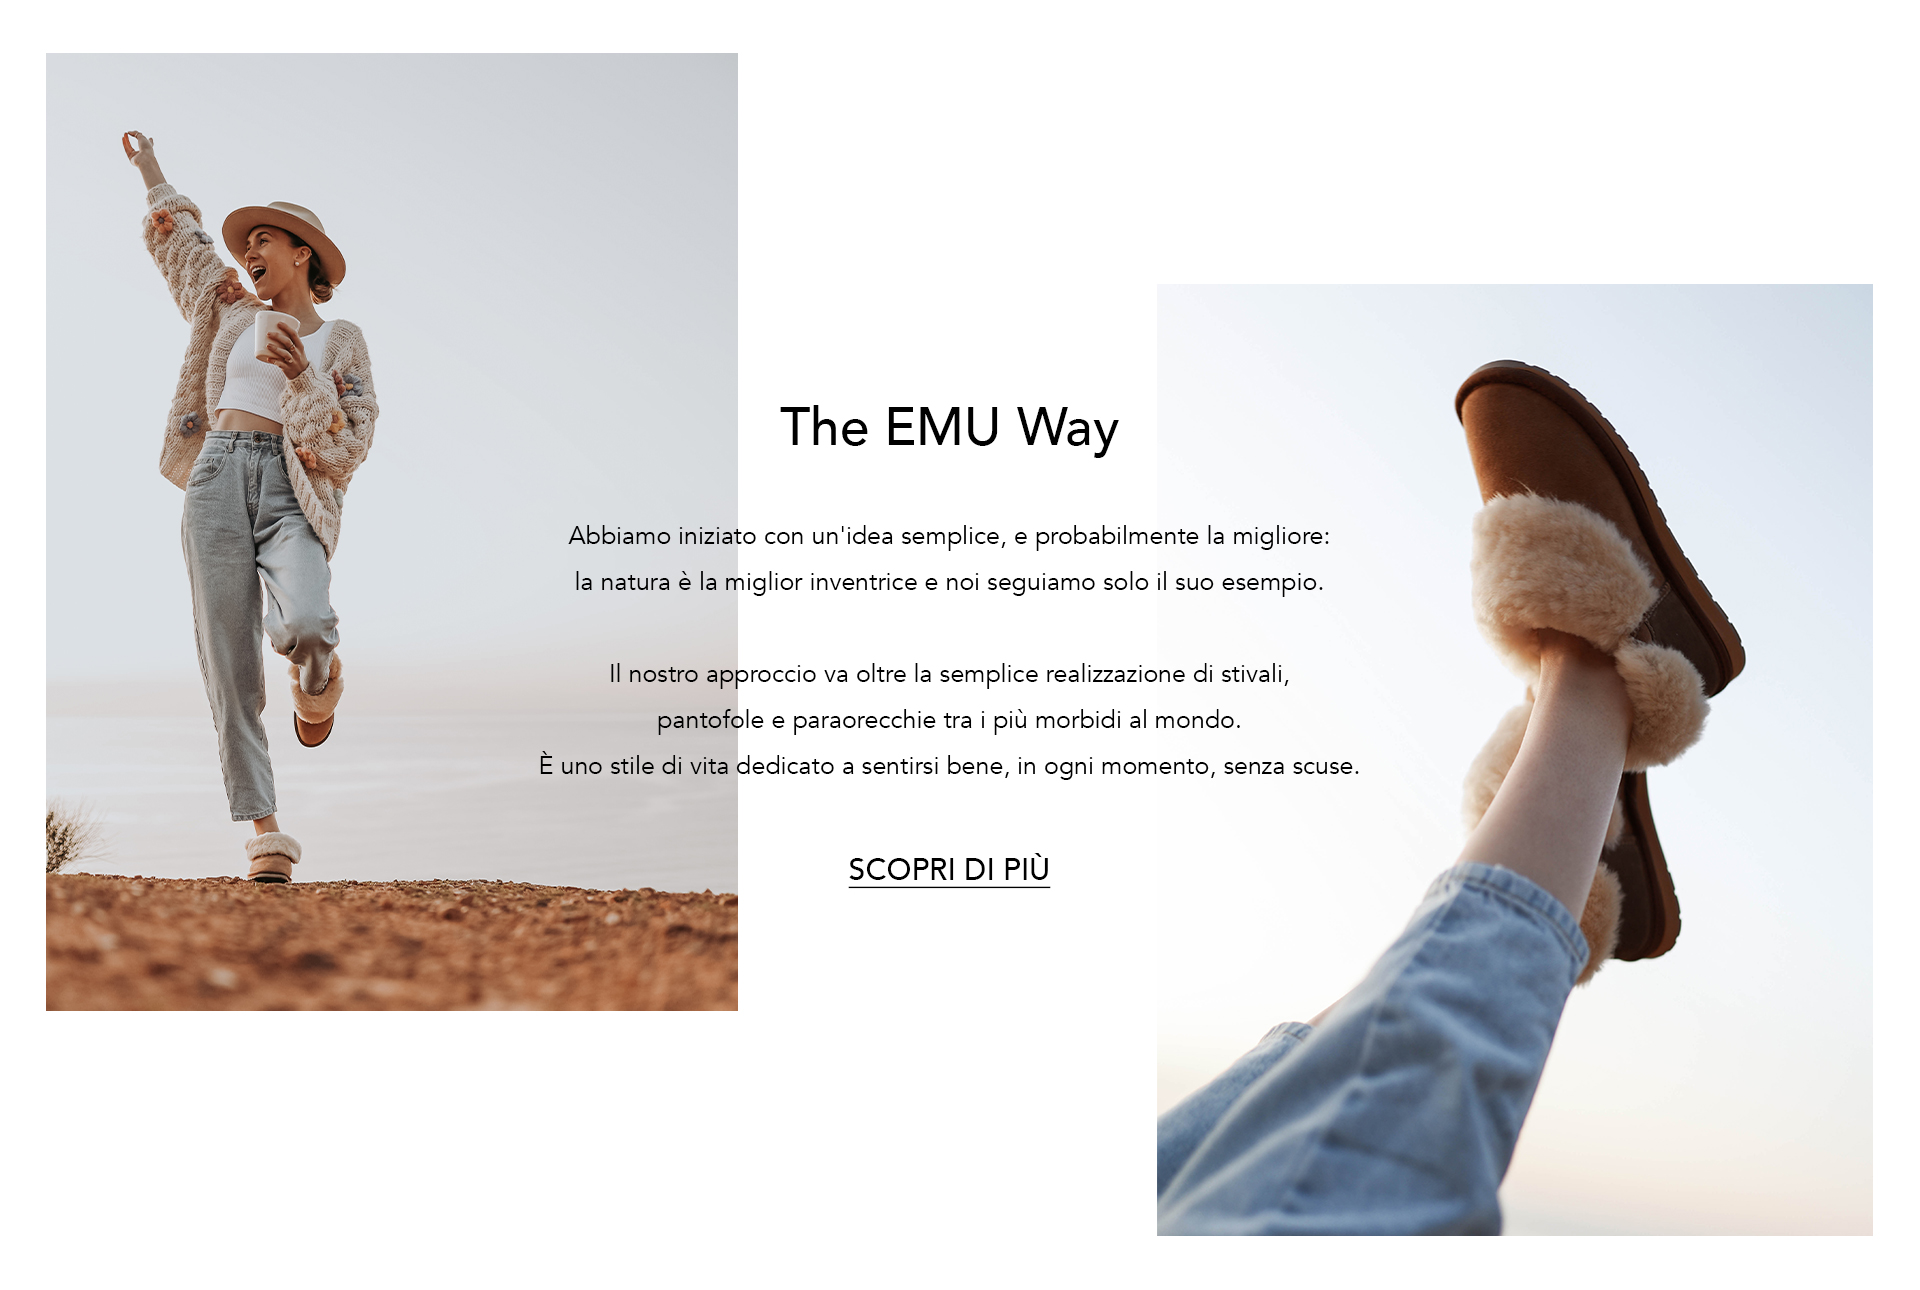 The EMU Way. We started out with s simple idea and probably the best: that nature is the best inventor and we're just following her lead. Simple. Learn More.